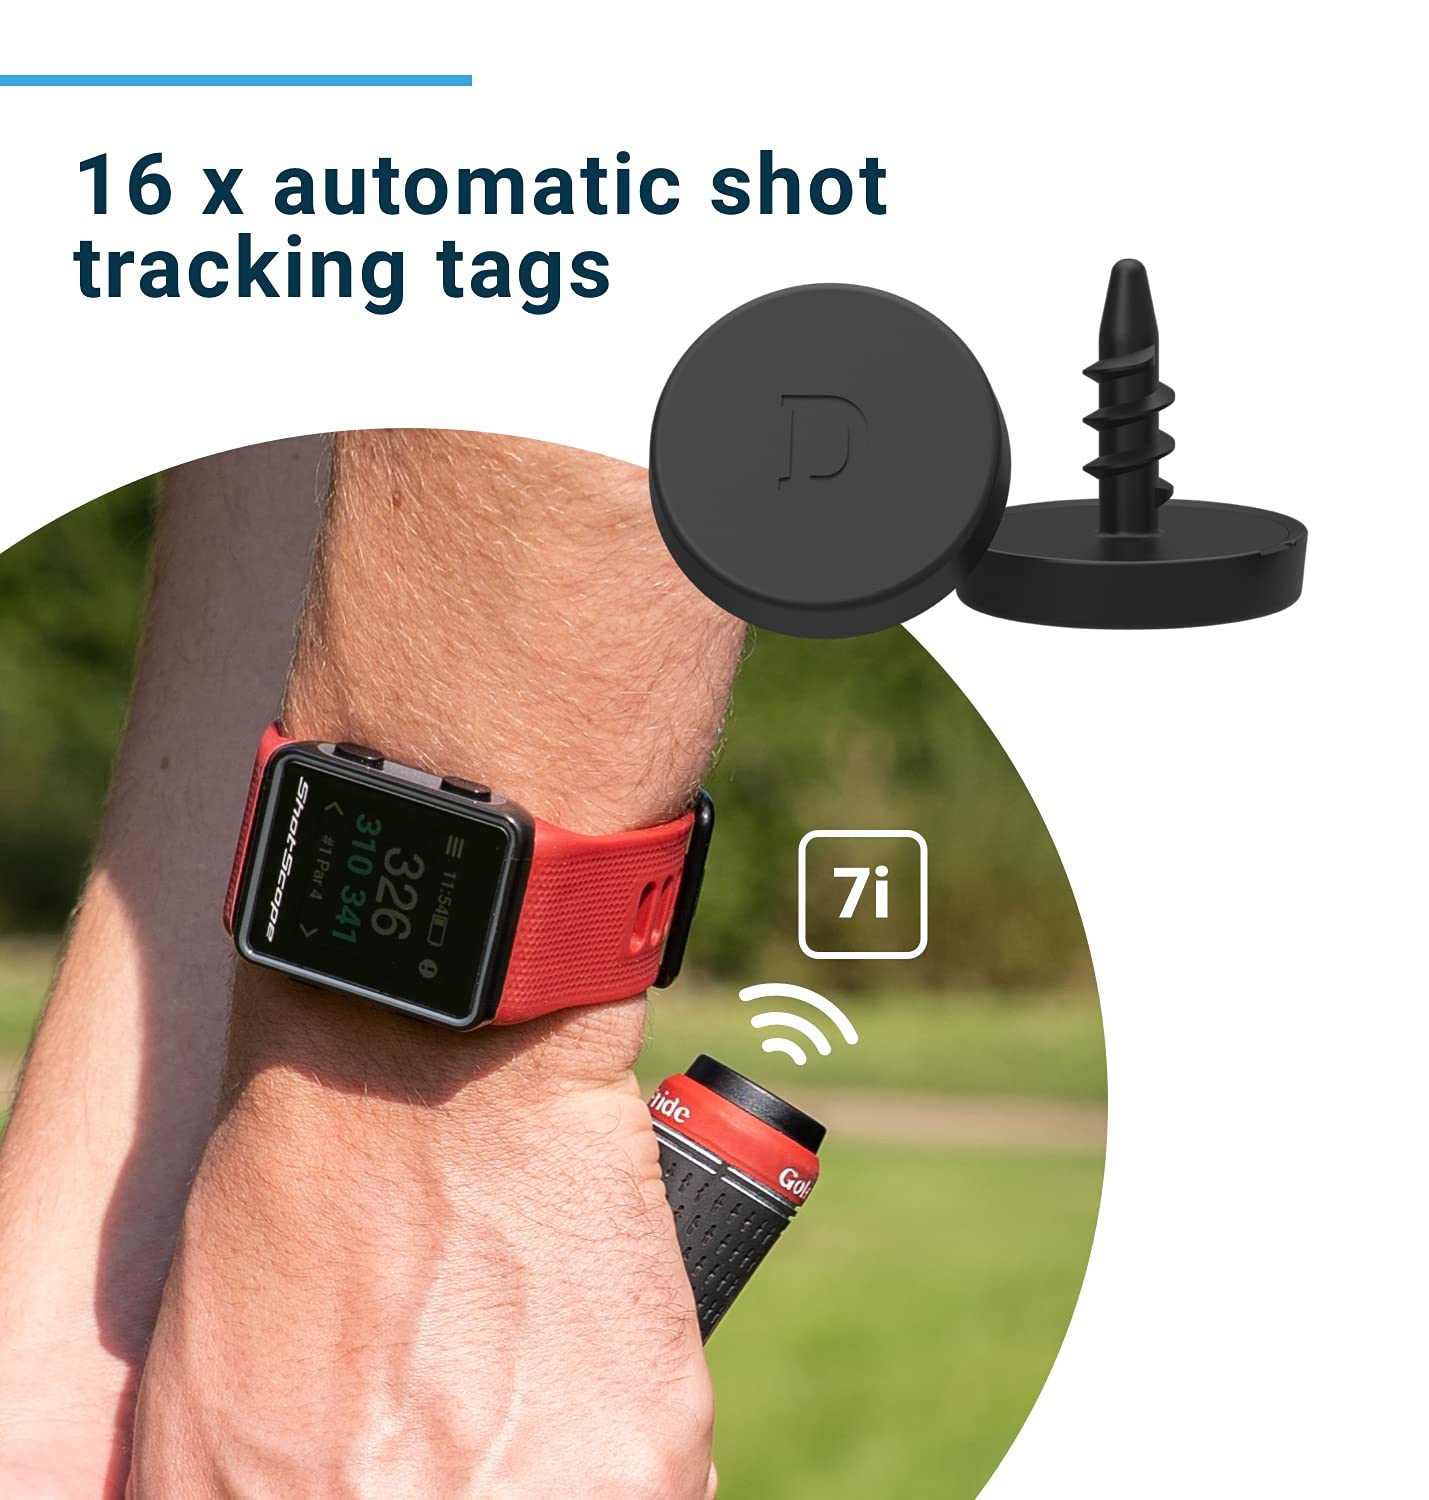 Shot Scope V3 GPS Golf Watch - Automatic Shot Tracking - F/M/B + Hazard Distances - Strokes Gained - iOS and Android Apps - 100+ Statistics, 36,000+ Pre-Loaded Worldwide Courses - No Subscriptions